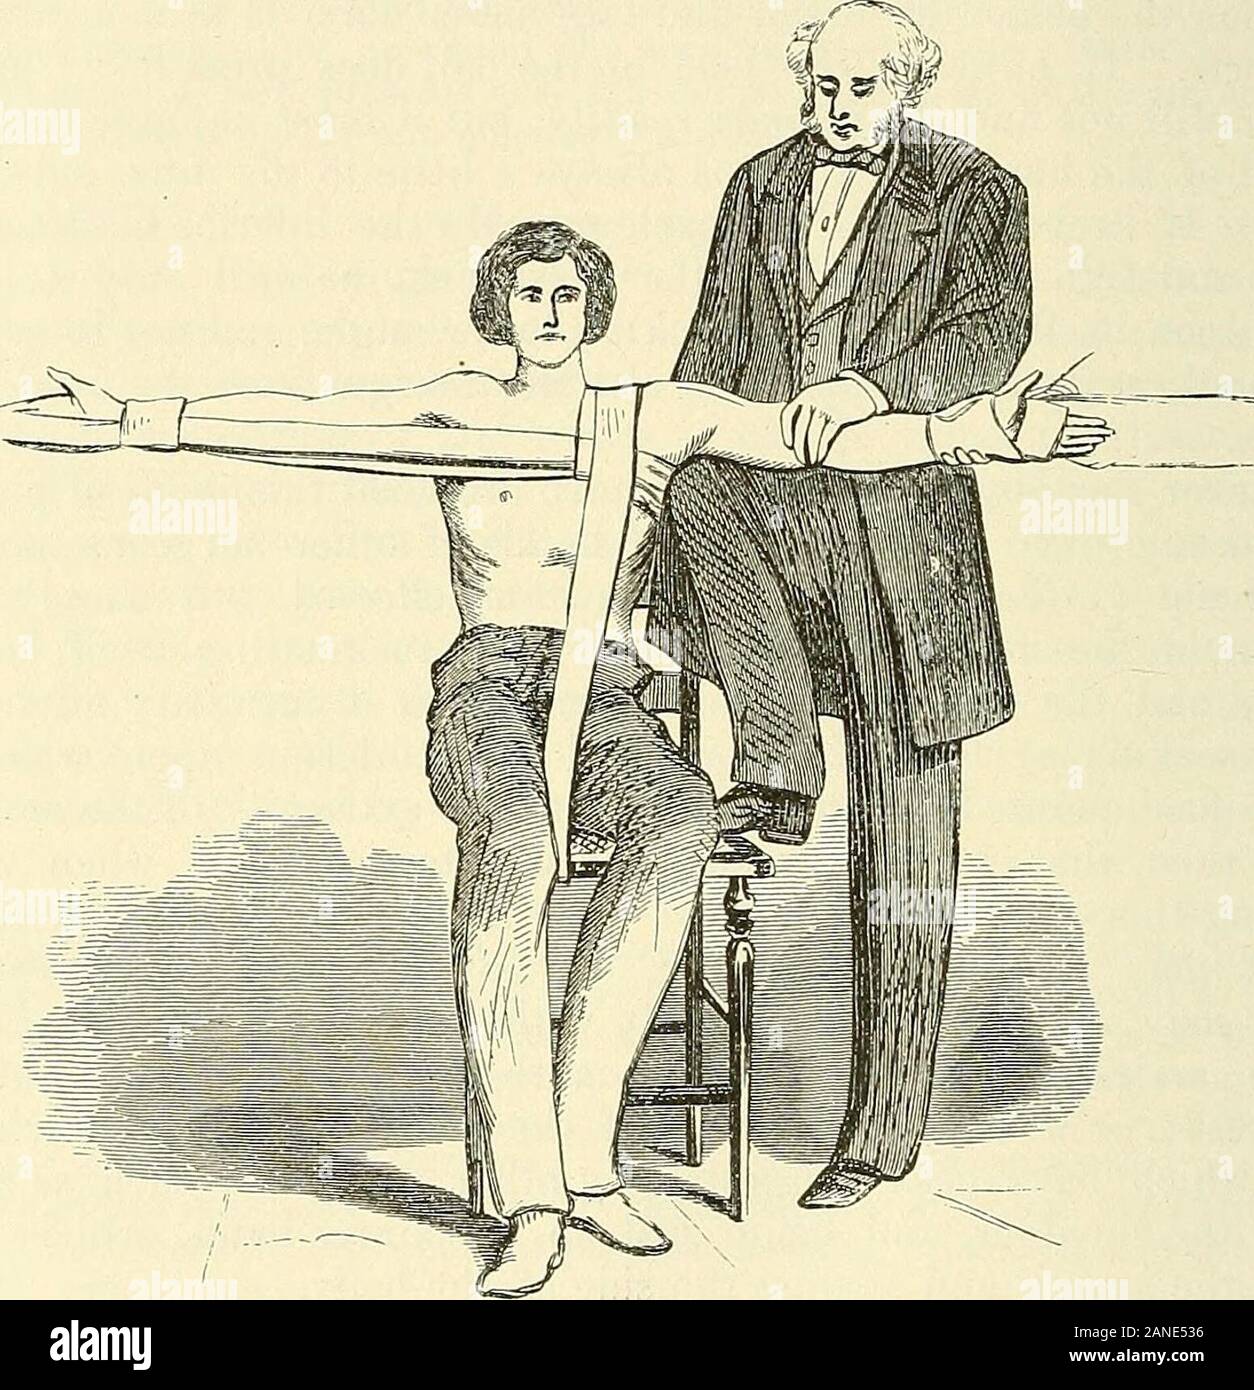 A practical treatise on fractures and dislocations . vol. xix. p. 386, Feb. 1837. Dorseys Elements ofSurgery, vol. i. p. 214. Philadelphia, 1813. 2 Smiths Med. and Surg. Memoirs, Baltimore, 1831, p. 337; also Amer. Journ. Med.Sci., July, 1861; also Amer. Med. Times, Nov. 9, 1861; paper by Stephen Rogers, M.D. 576 DISLOCATIONS OF THE SHOULDER. proceeds to give what seems to him the most effectual mode of rendering thescapula immovable, namely, to make the counter-extension from the oppositewrist. By this method the trapezii are provoked to contraction, and the scapulaof the injured side is draw Stock Photo